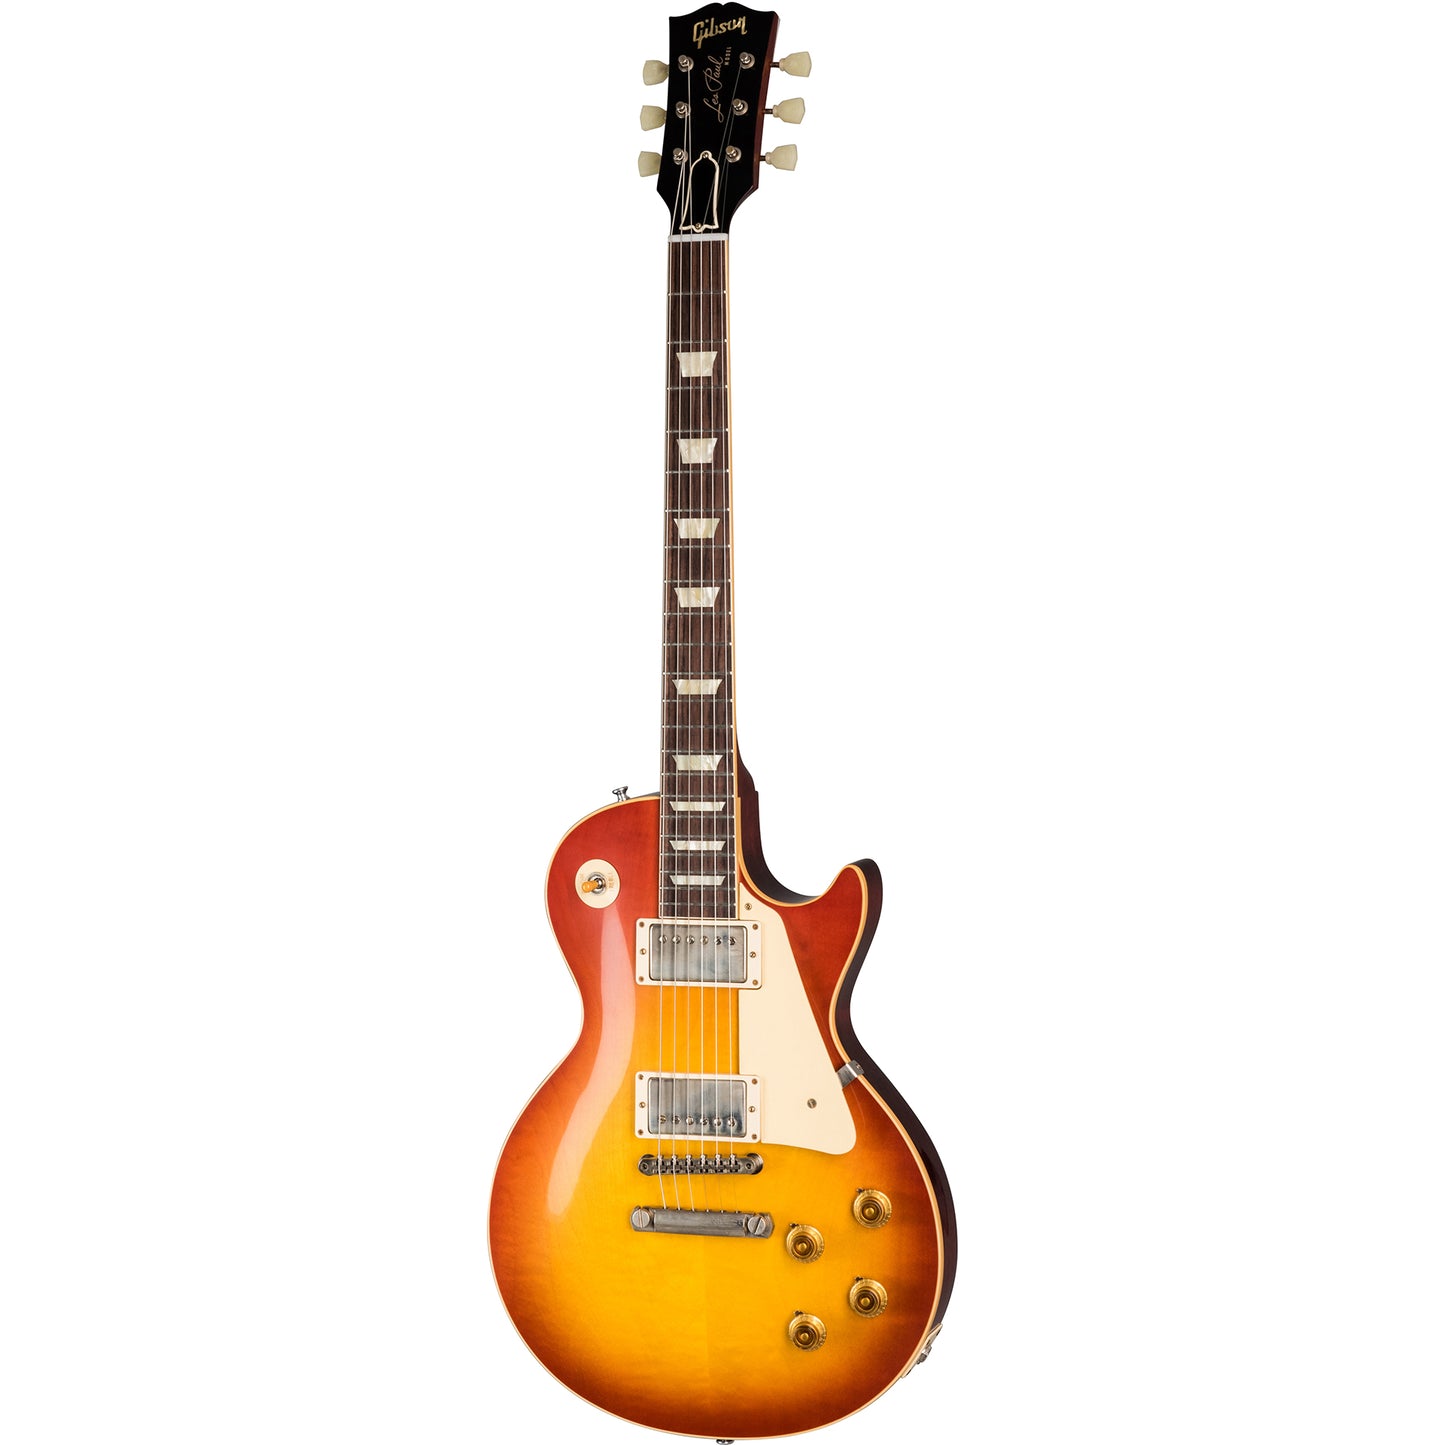 Gibson 1958 Les Paul Standard Reissue Electric Guitar - Washed Cherry Sunburst